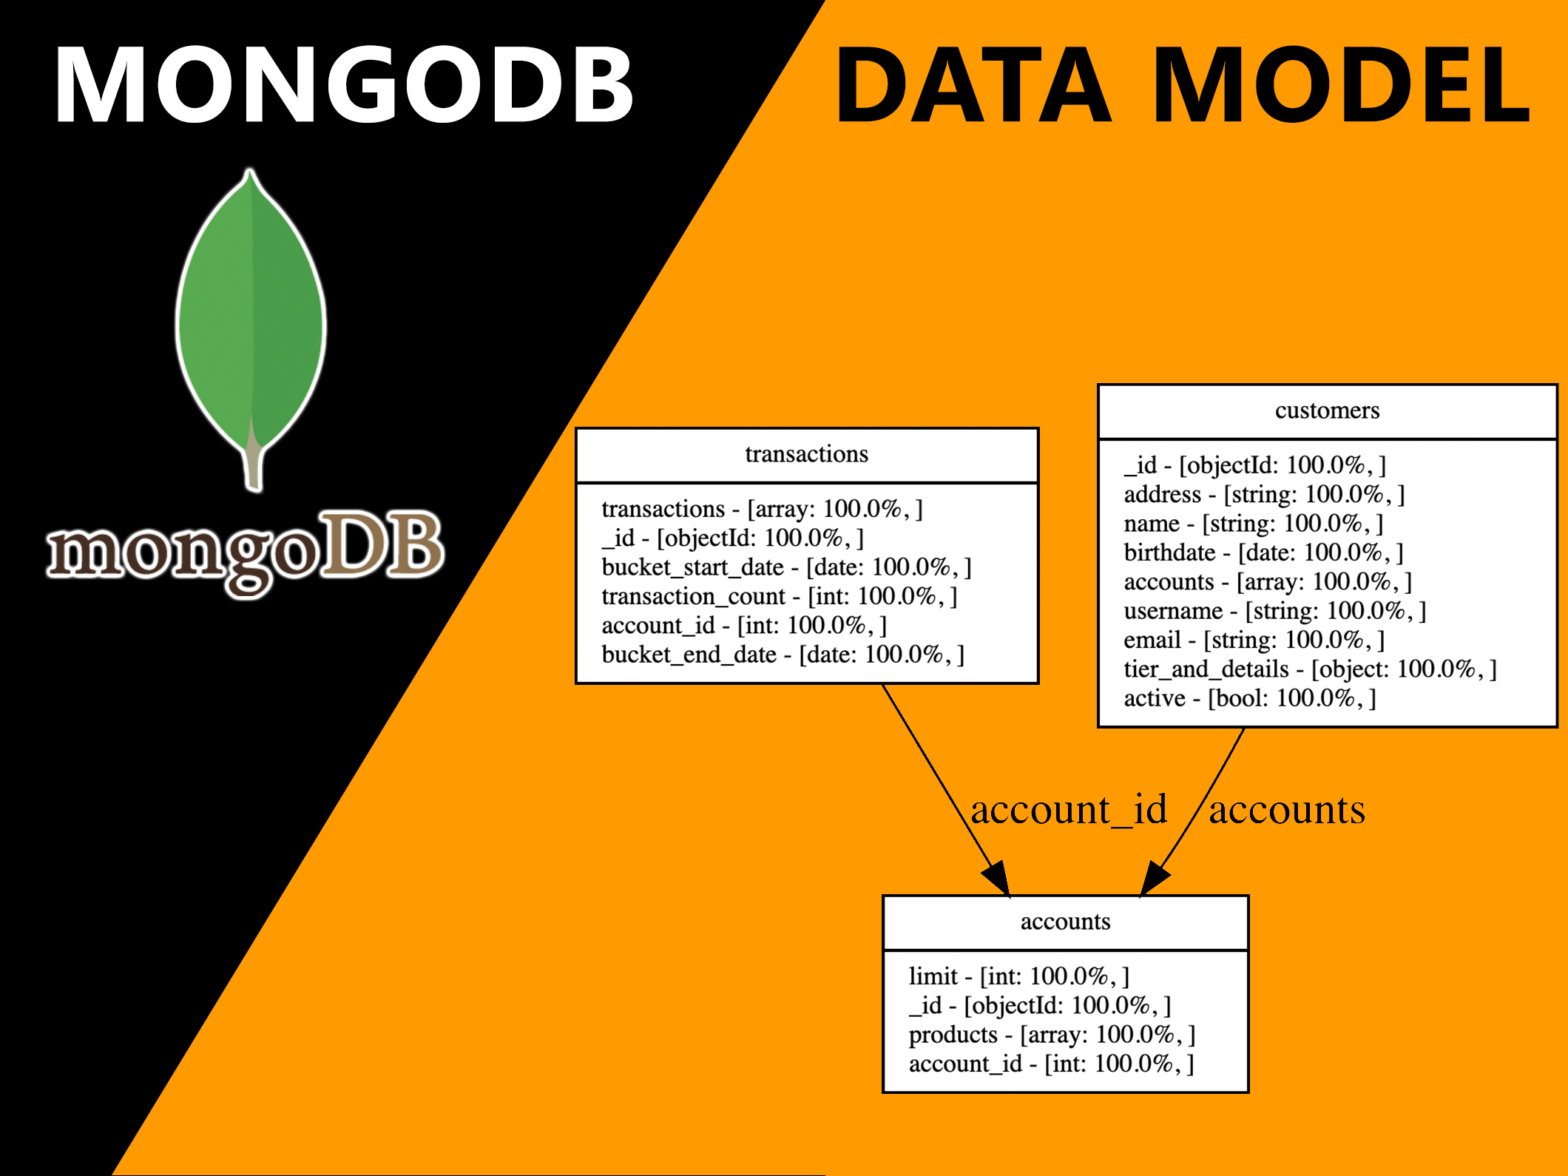 Need a data model for a MongoDB database? Here’s how to do one.